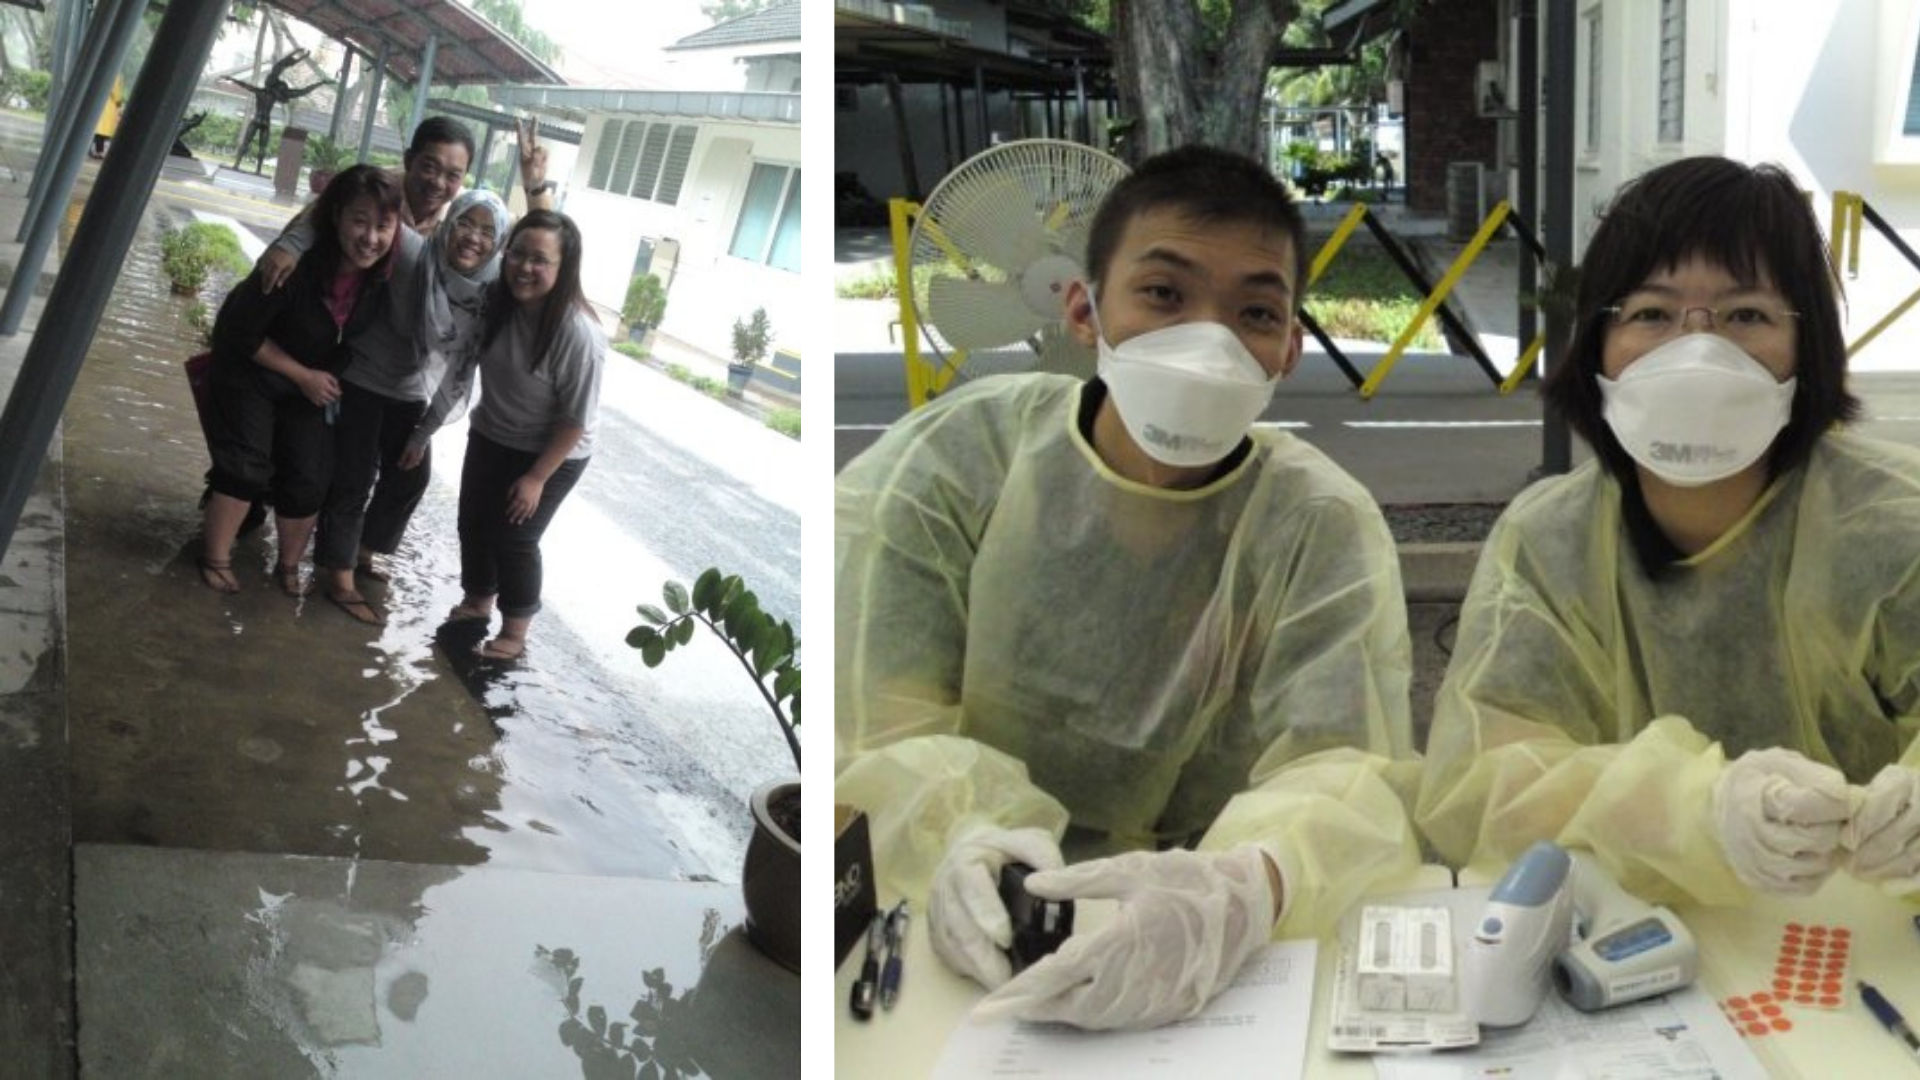 Flooding at Goodman Road campus and Talent Academy amidst H1N1